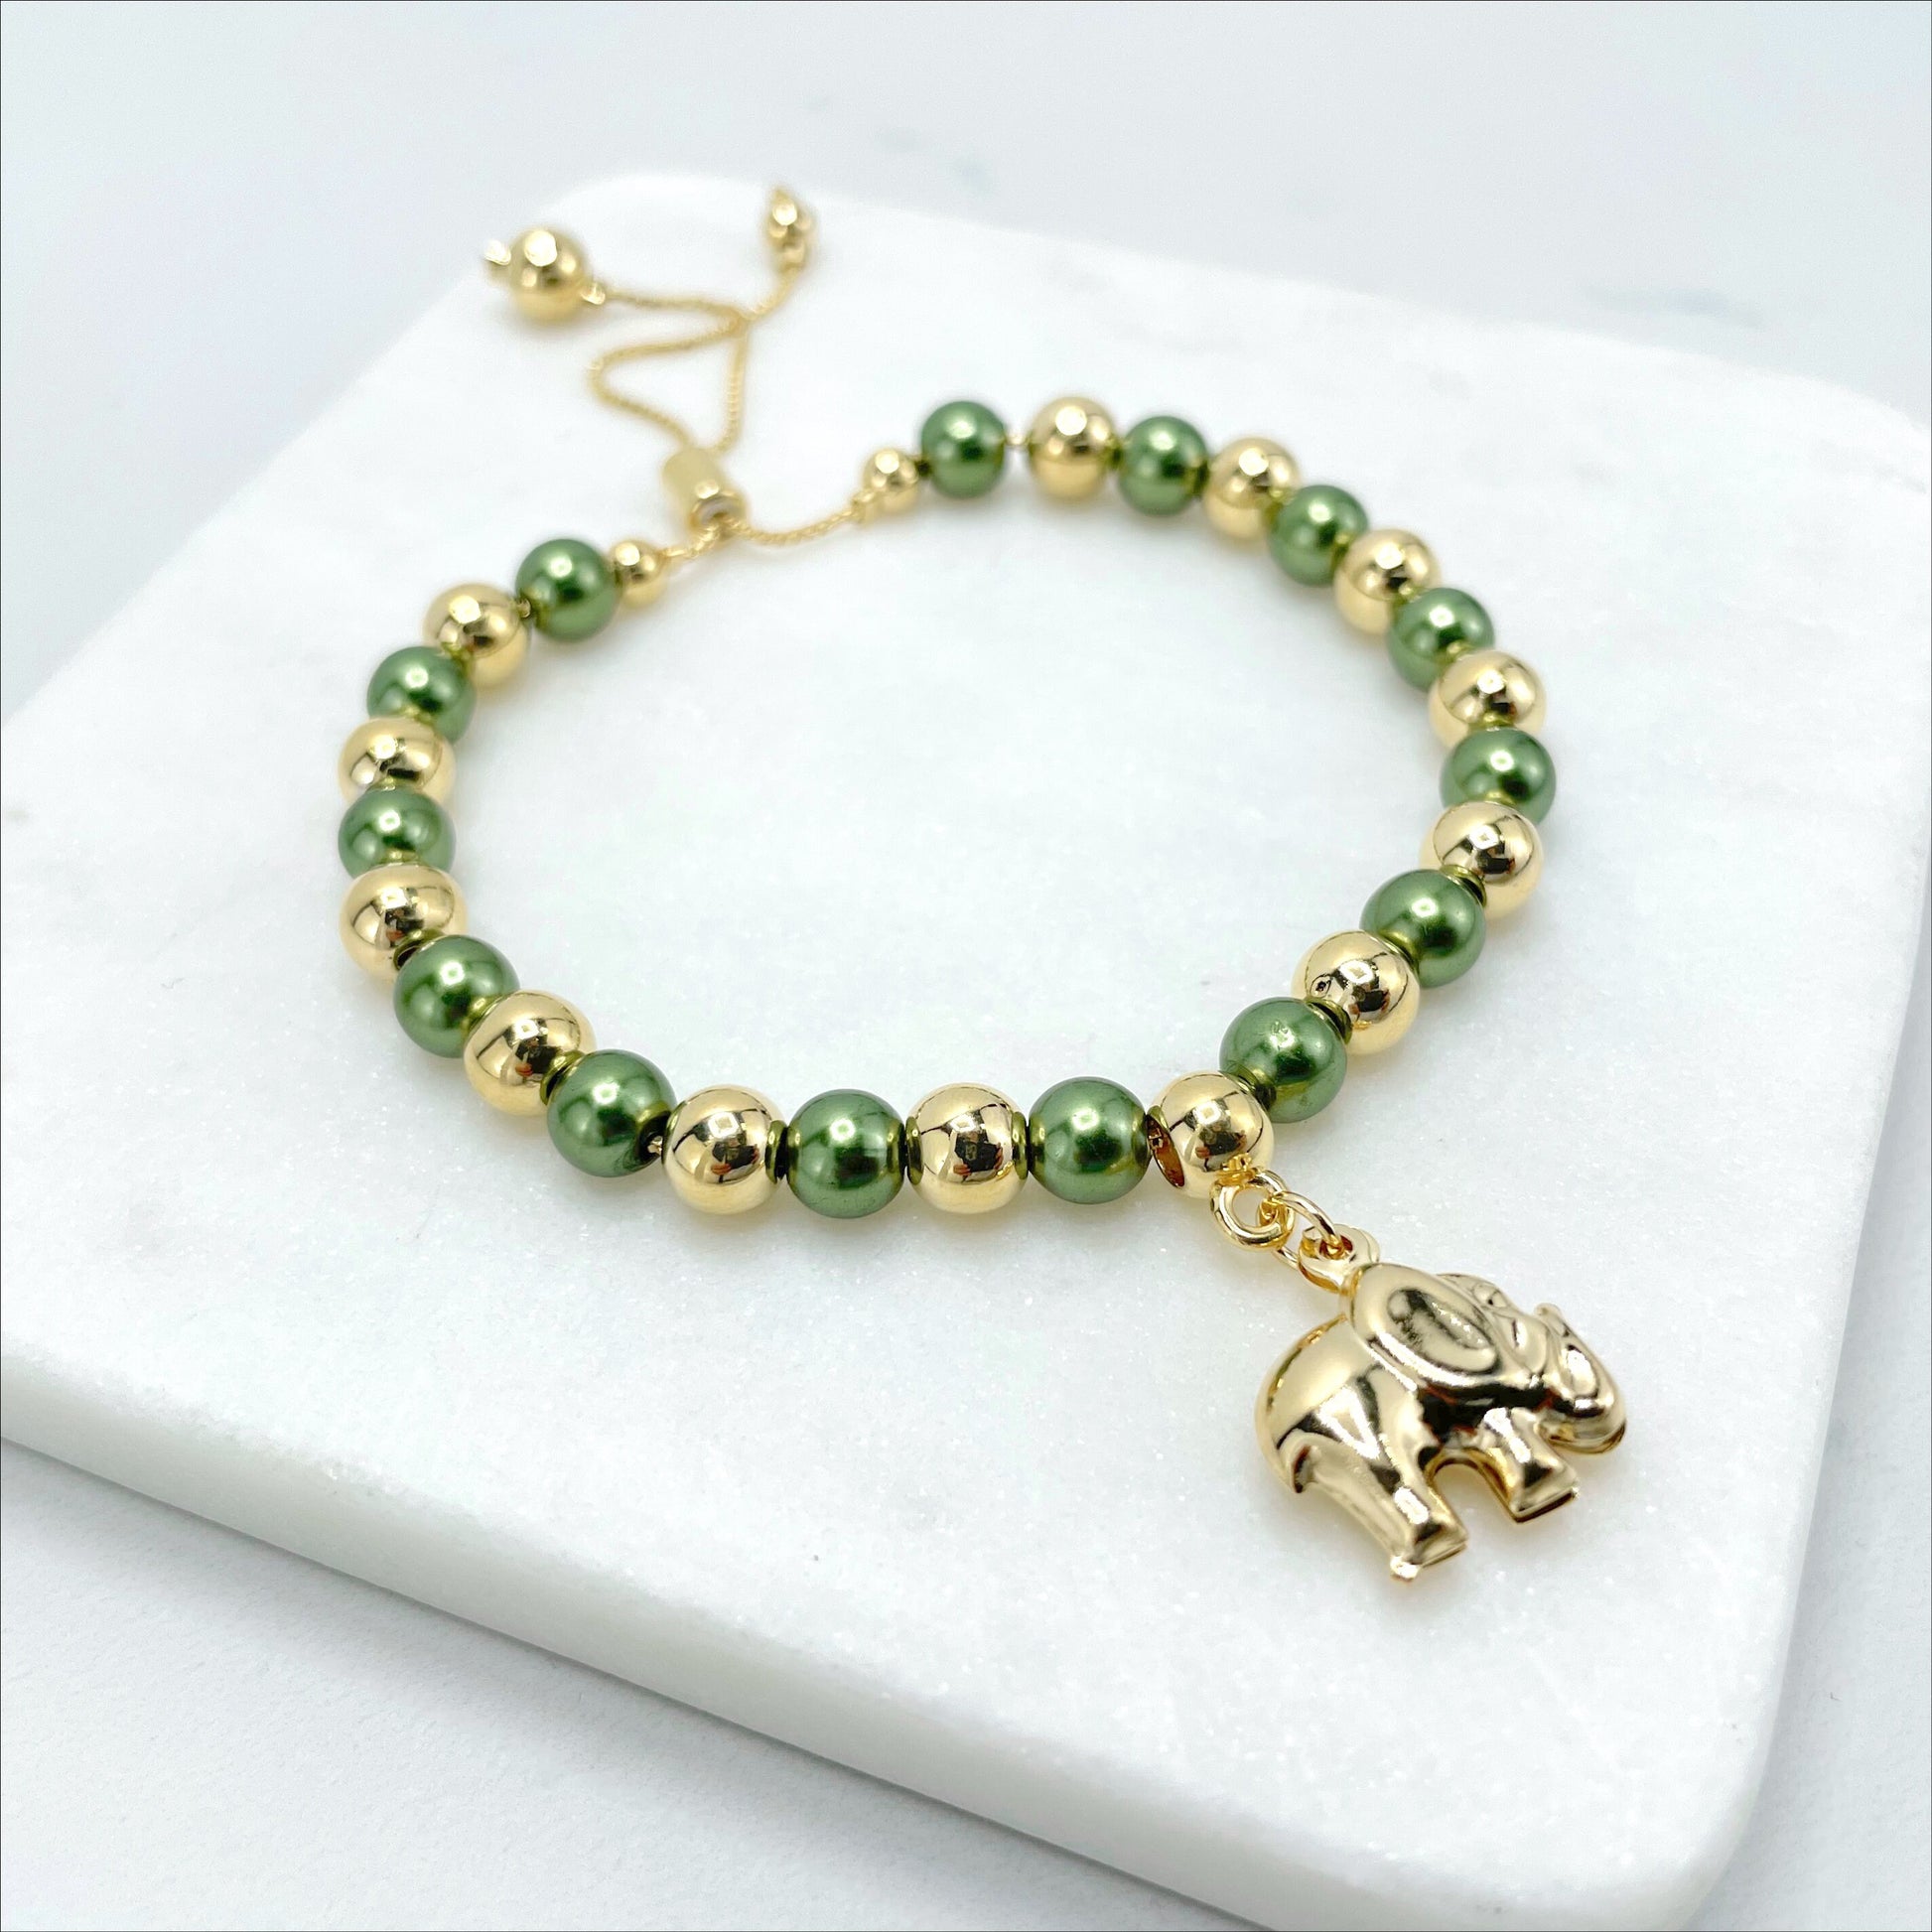 18k Gold Filled 1mm Box Chain with Green & Gold Beads, Elephant Charms, Adjustable Beaded Bracelet, Wholesale Jewelry Making Supplies